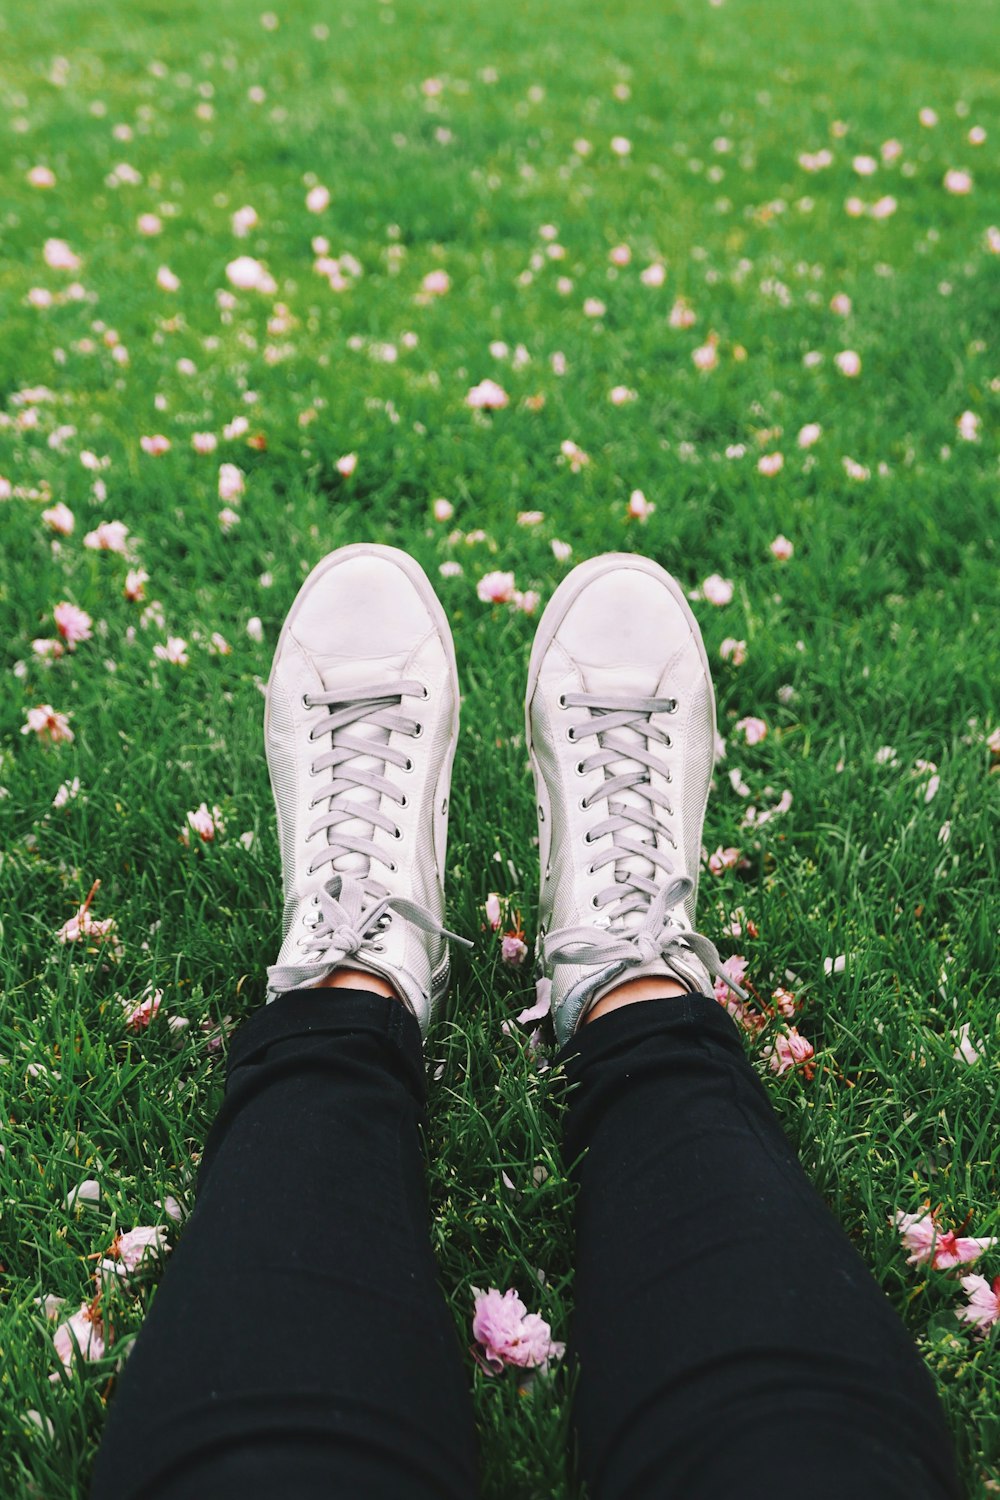 Green Shoes Pictures | Download Free Images on Unsplash